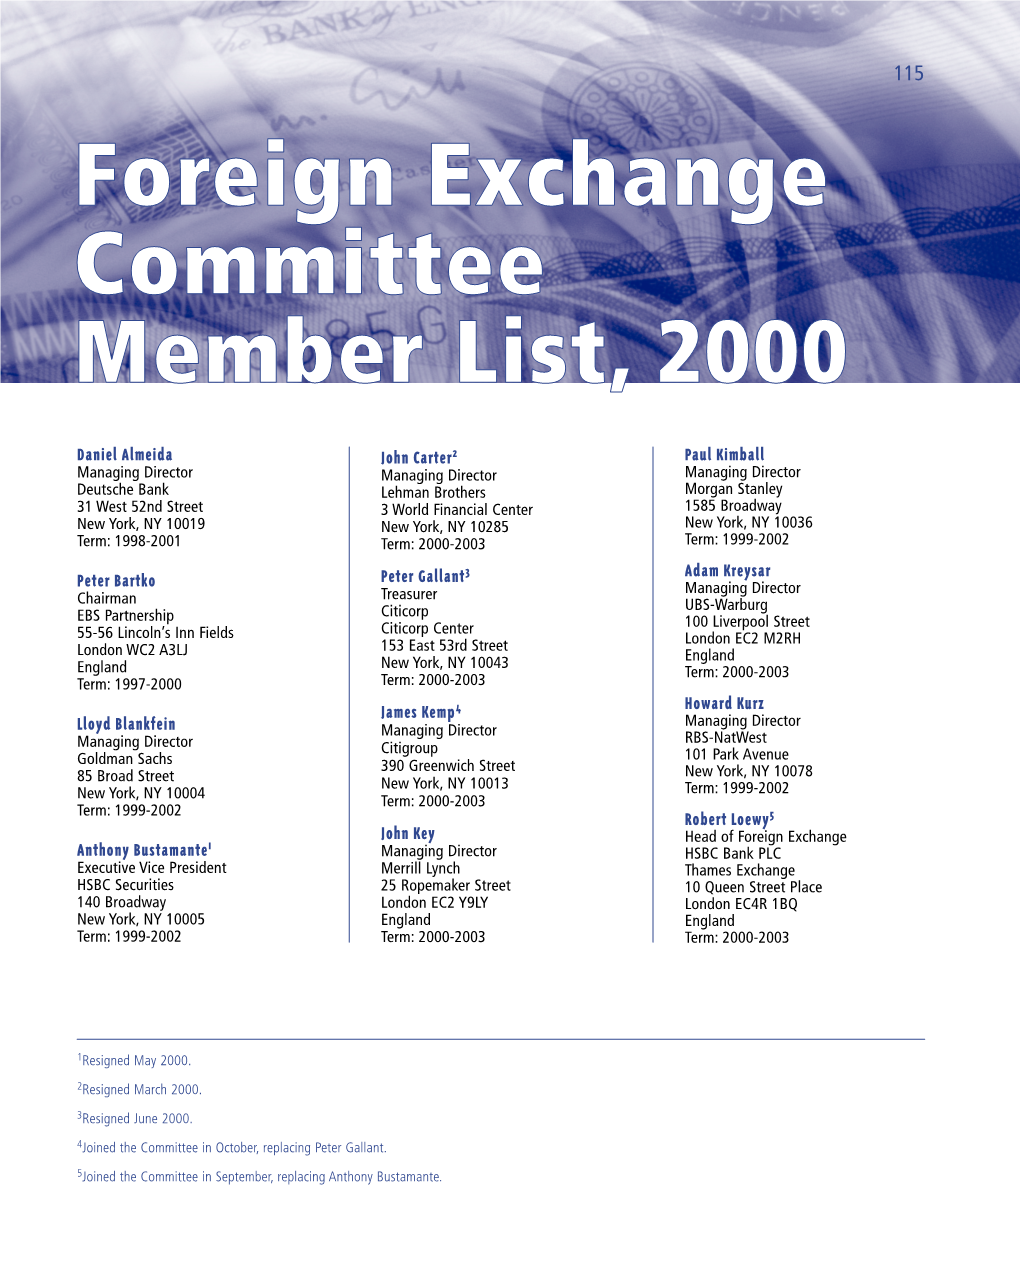 Foreign Exchange Committee Member List, 2000